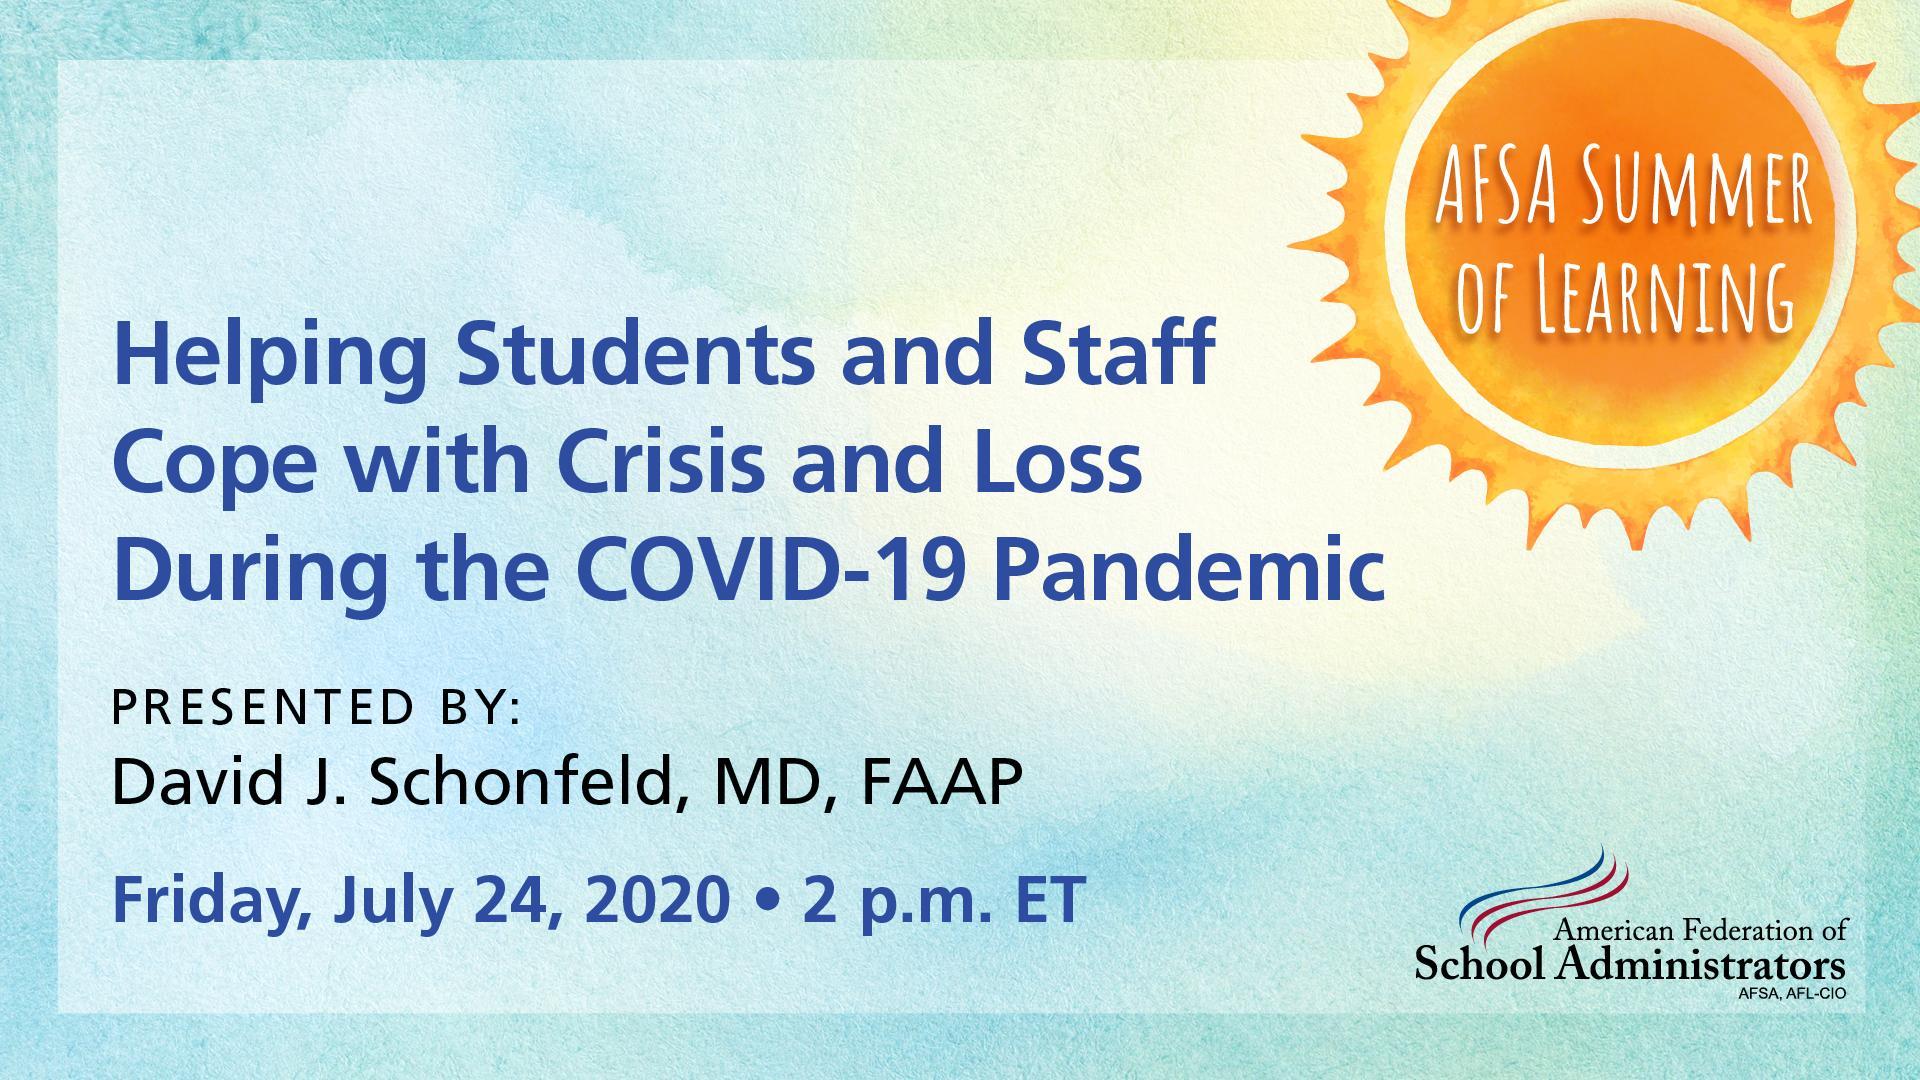 Helping Students and Staff Cope with Crisis and Loss During the COVID-19 Pandemic